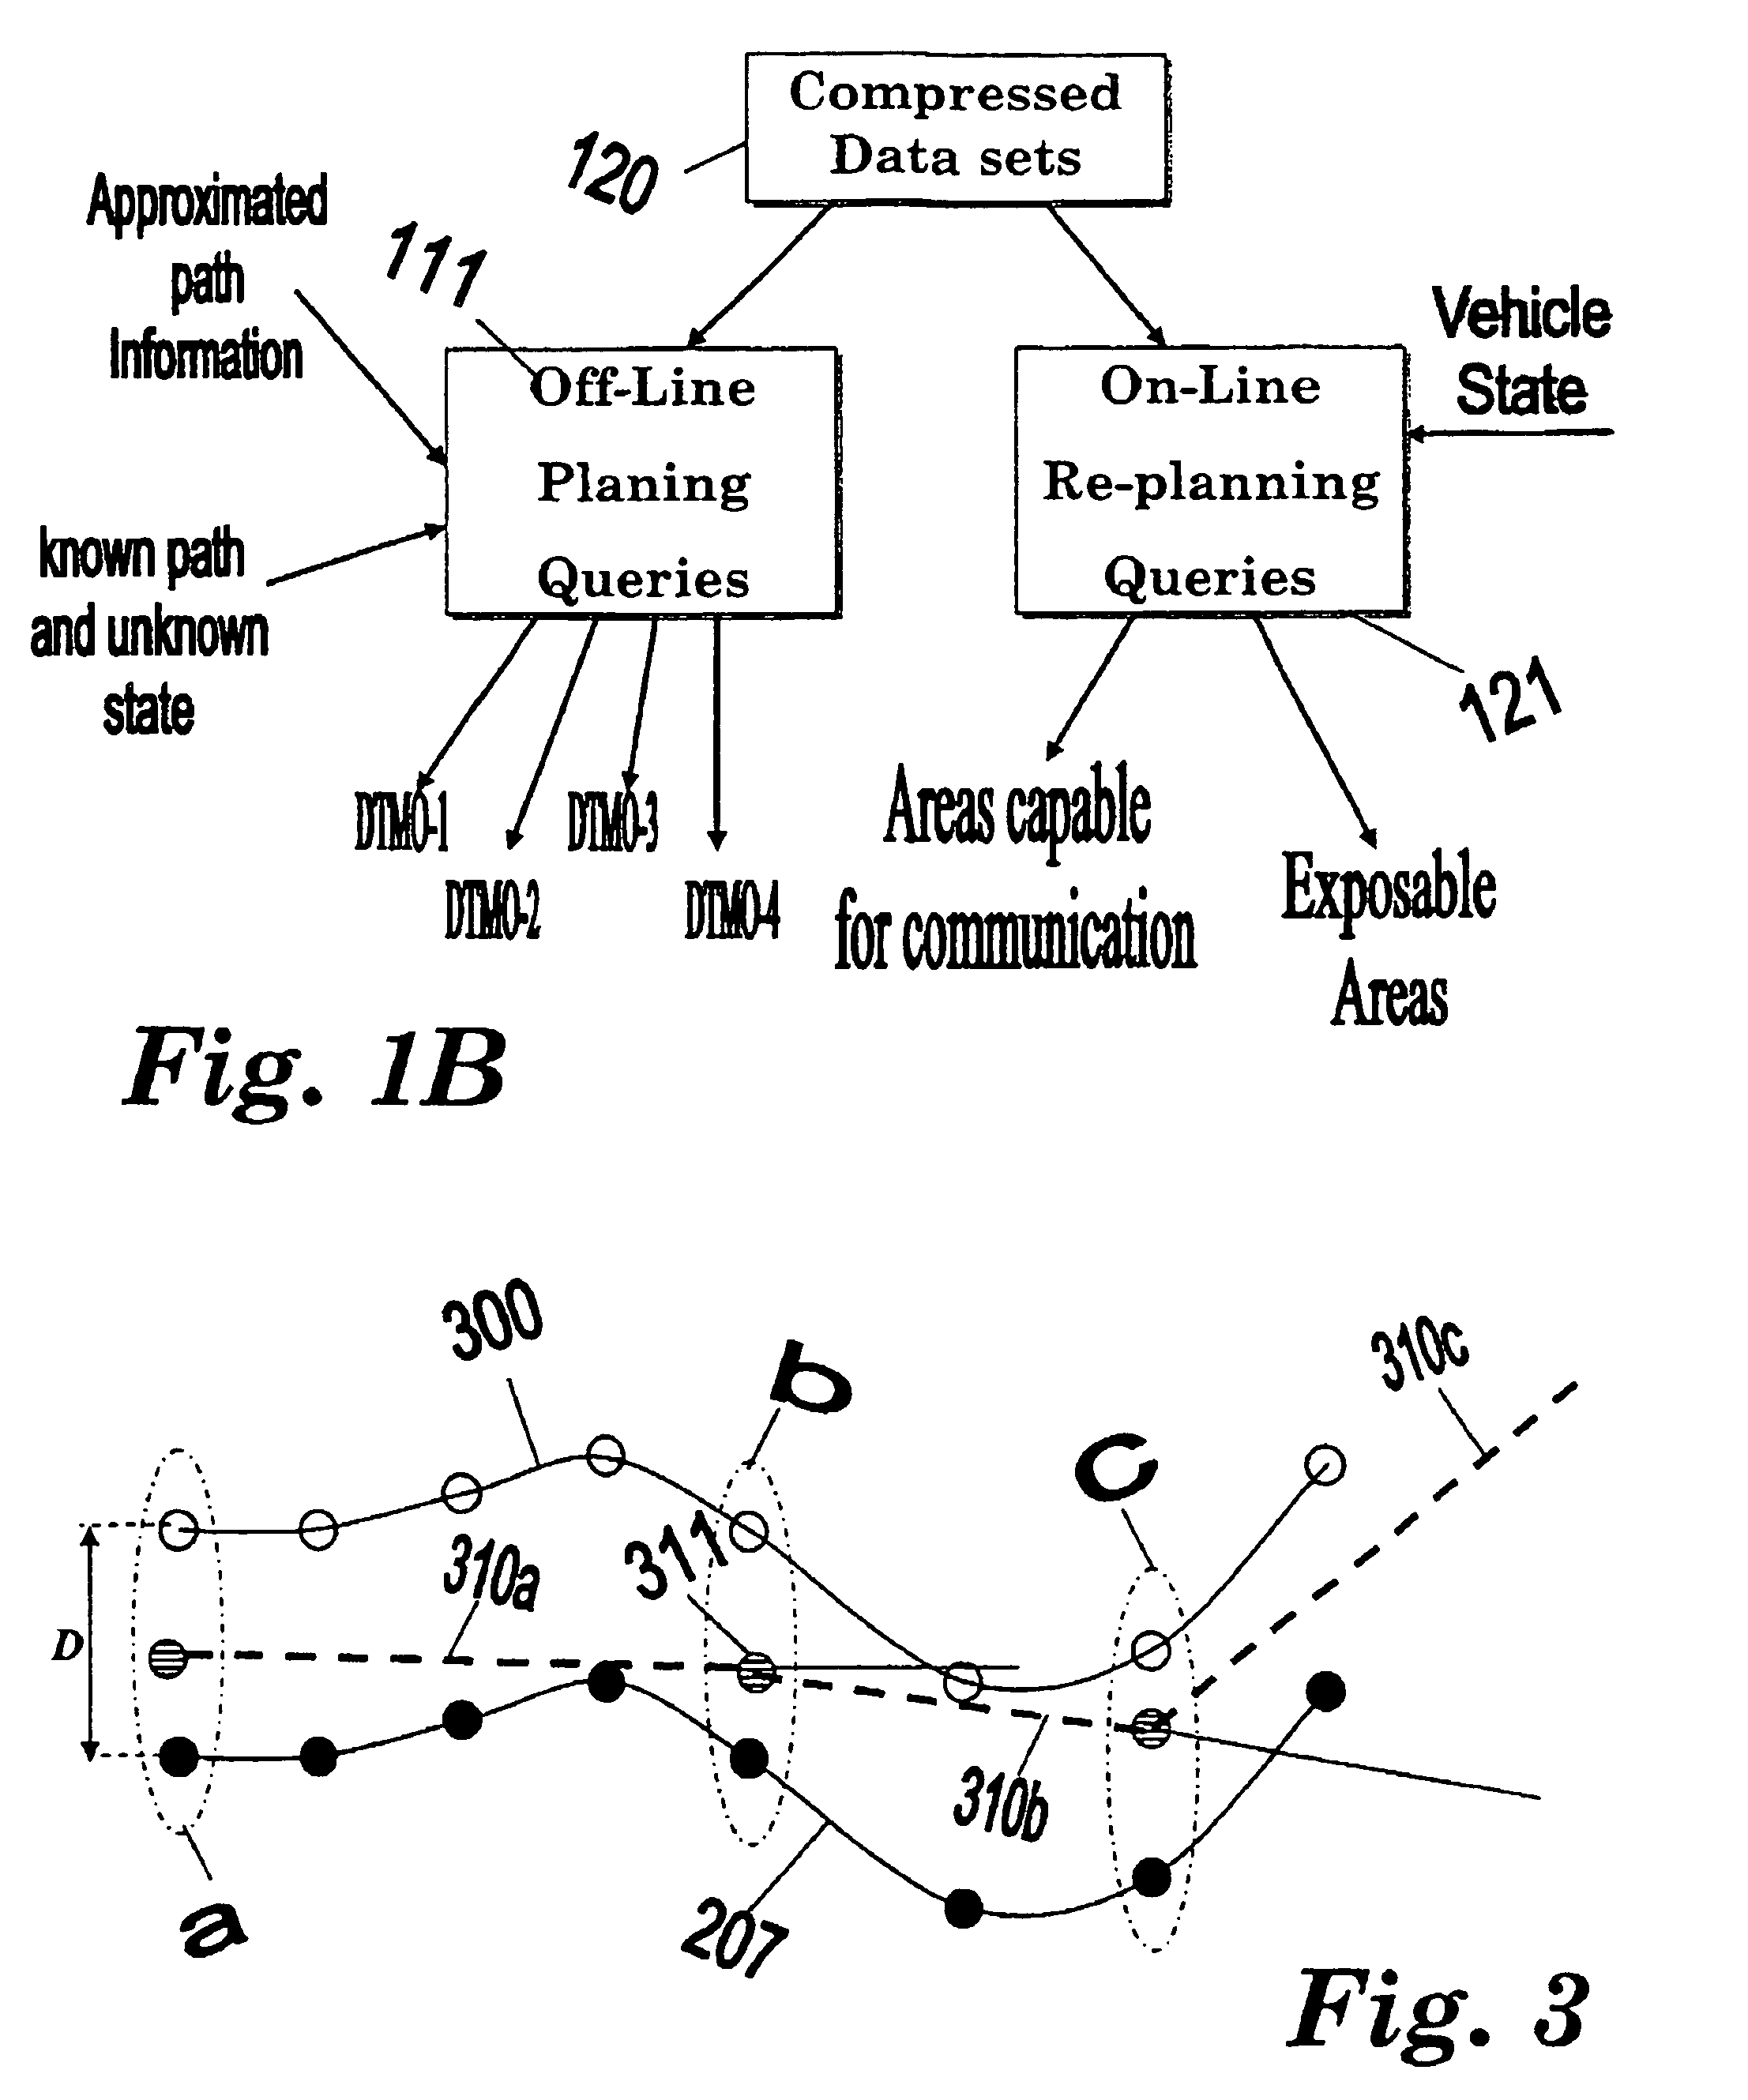 Method and system for processing and analyzing Digital Terrain Data